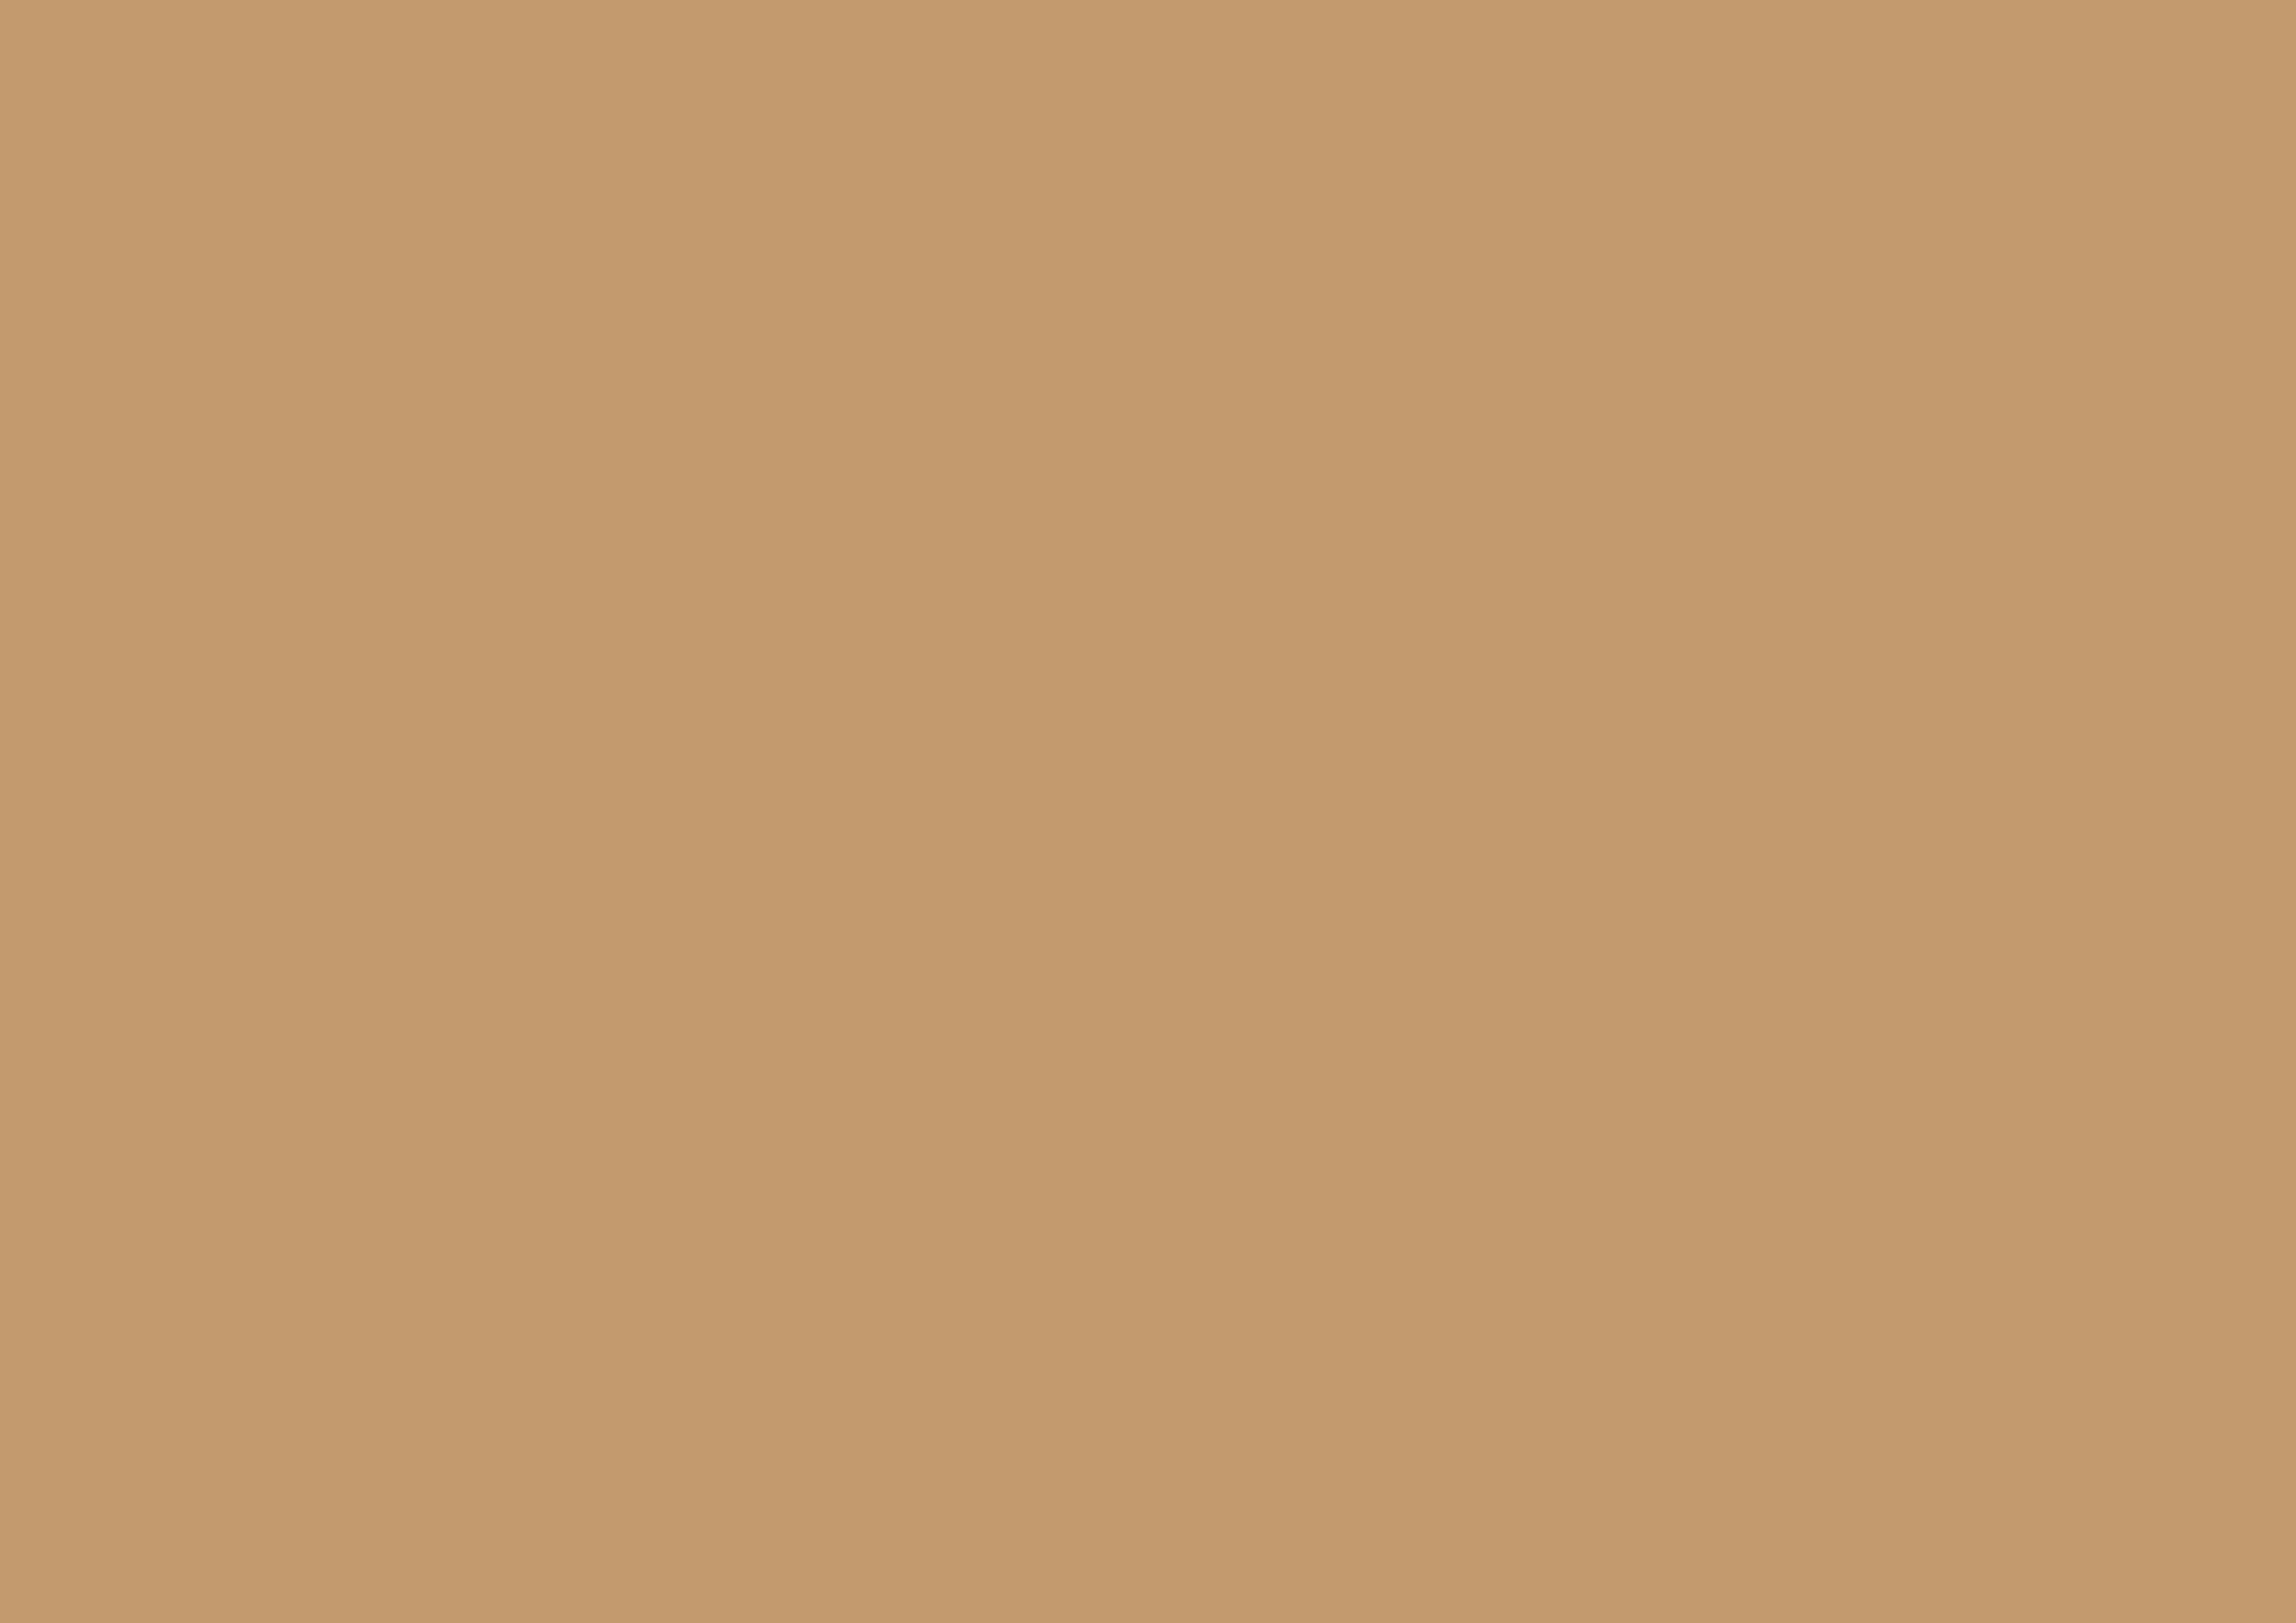 3508x2480 Wood Brown Solid Color Background